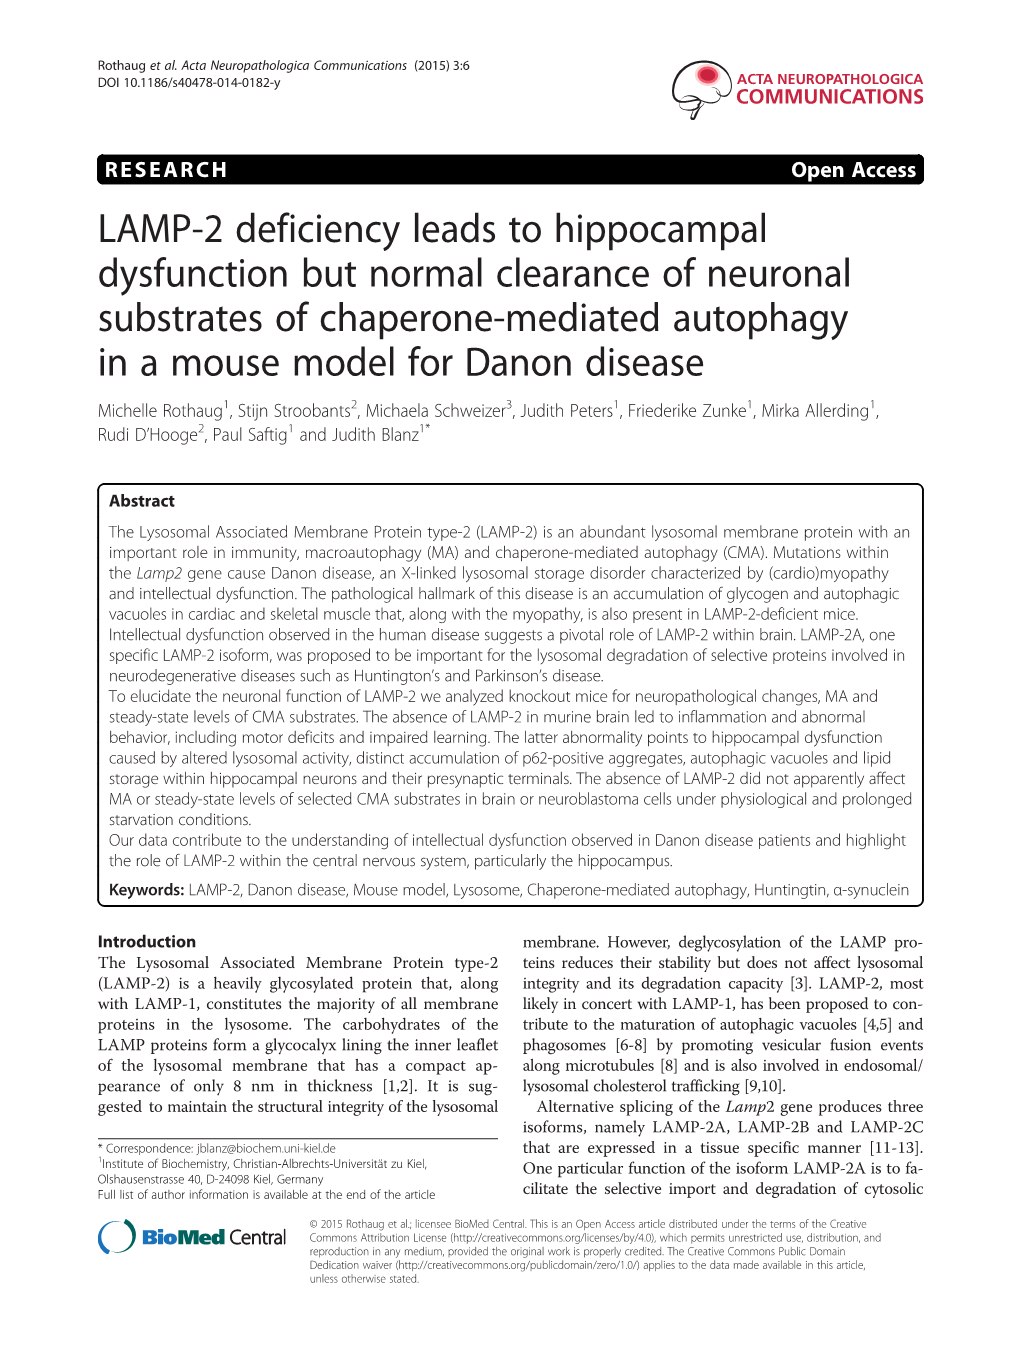 LAMP-2 Deficiency Leads to Hippocampal Dysfunction But